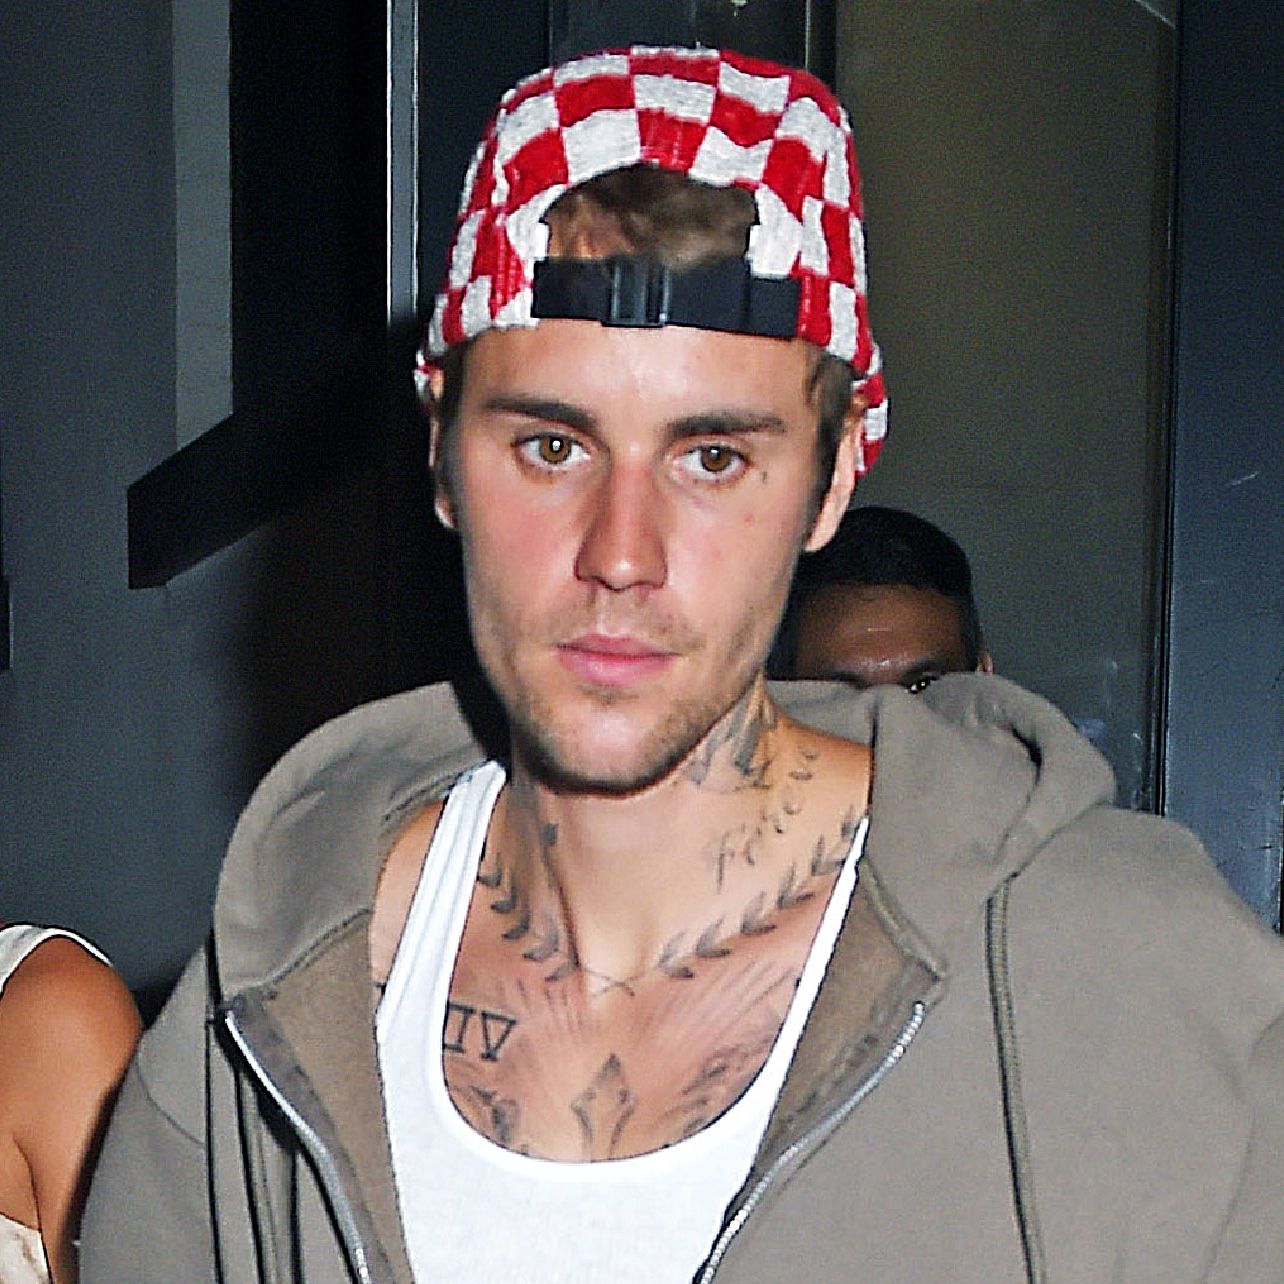 Justin Bieber Breaking Up With Scooter Braun as Manager